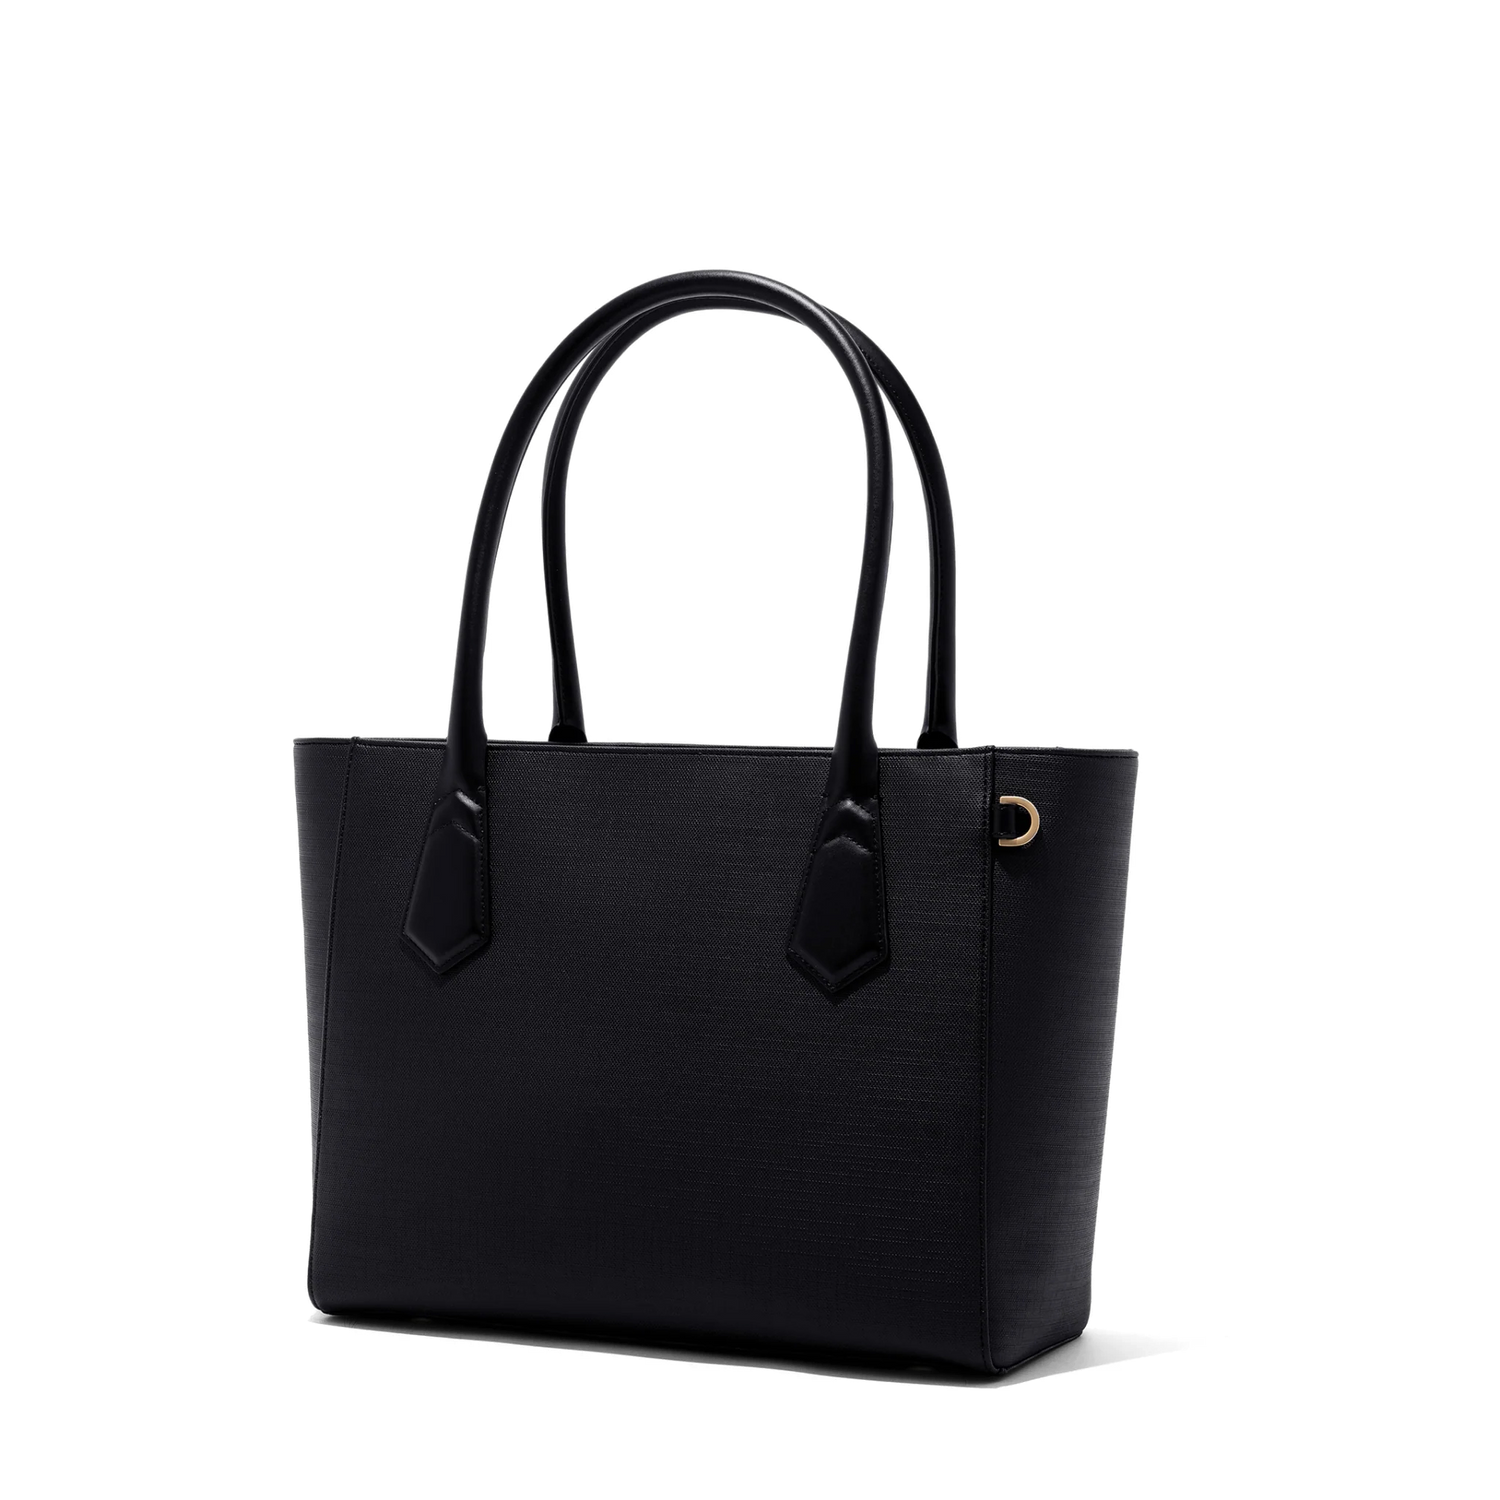 This Dagne Dover Tote Is The Perfect Fall Bag—And It's 40% Off